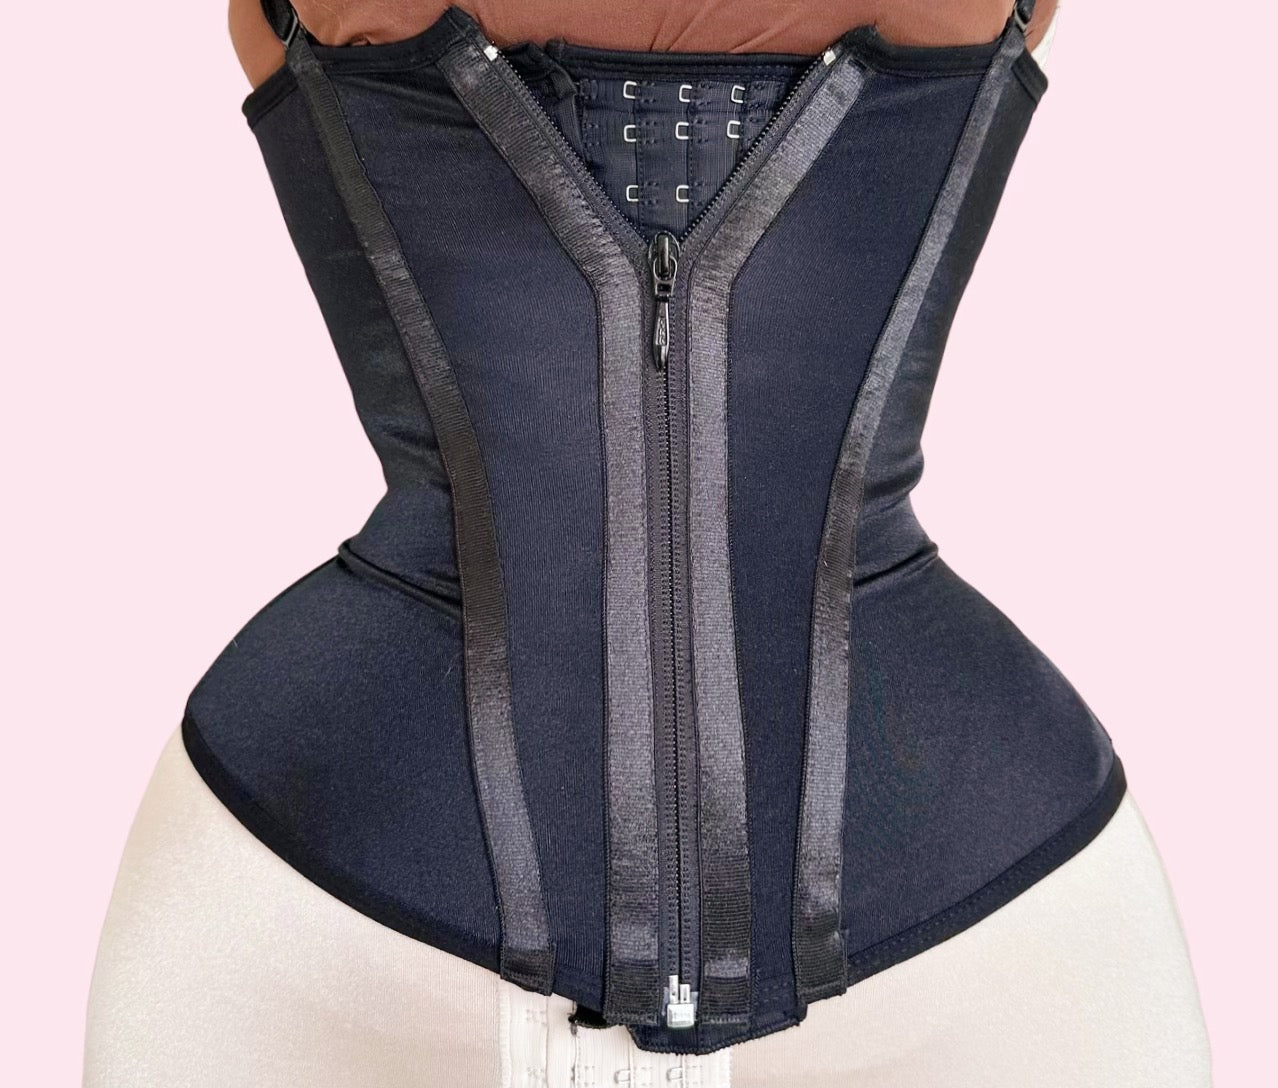 Plus Size Waist Trainer Corsets available at Lucky Doll Manila